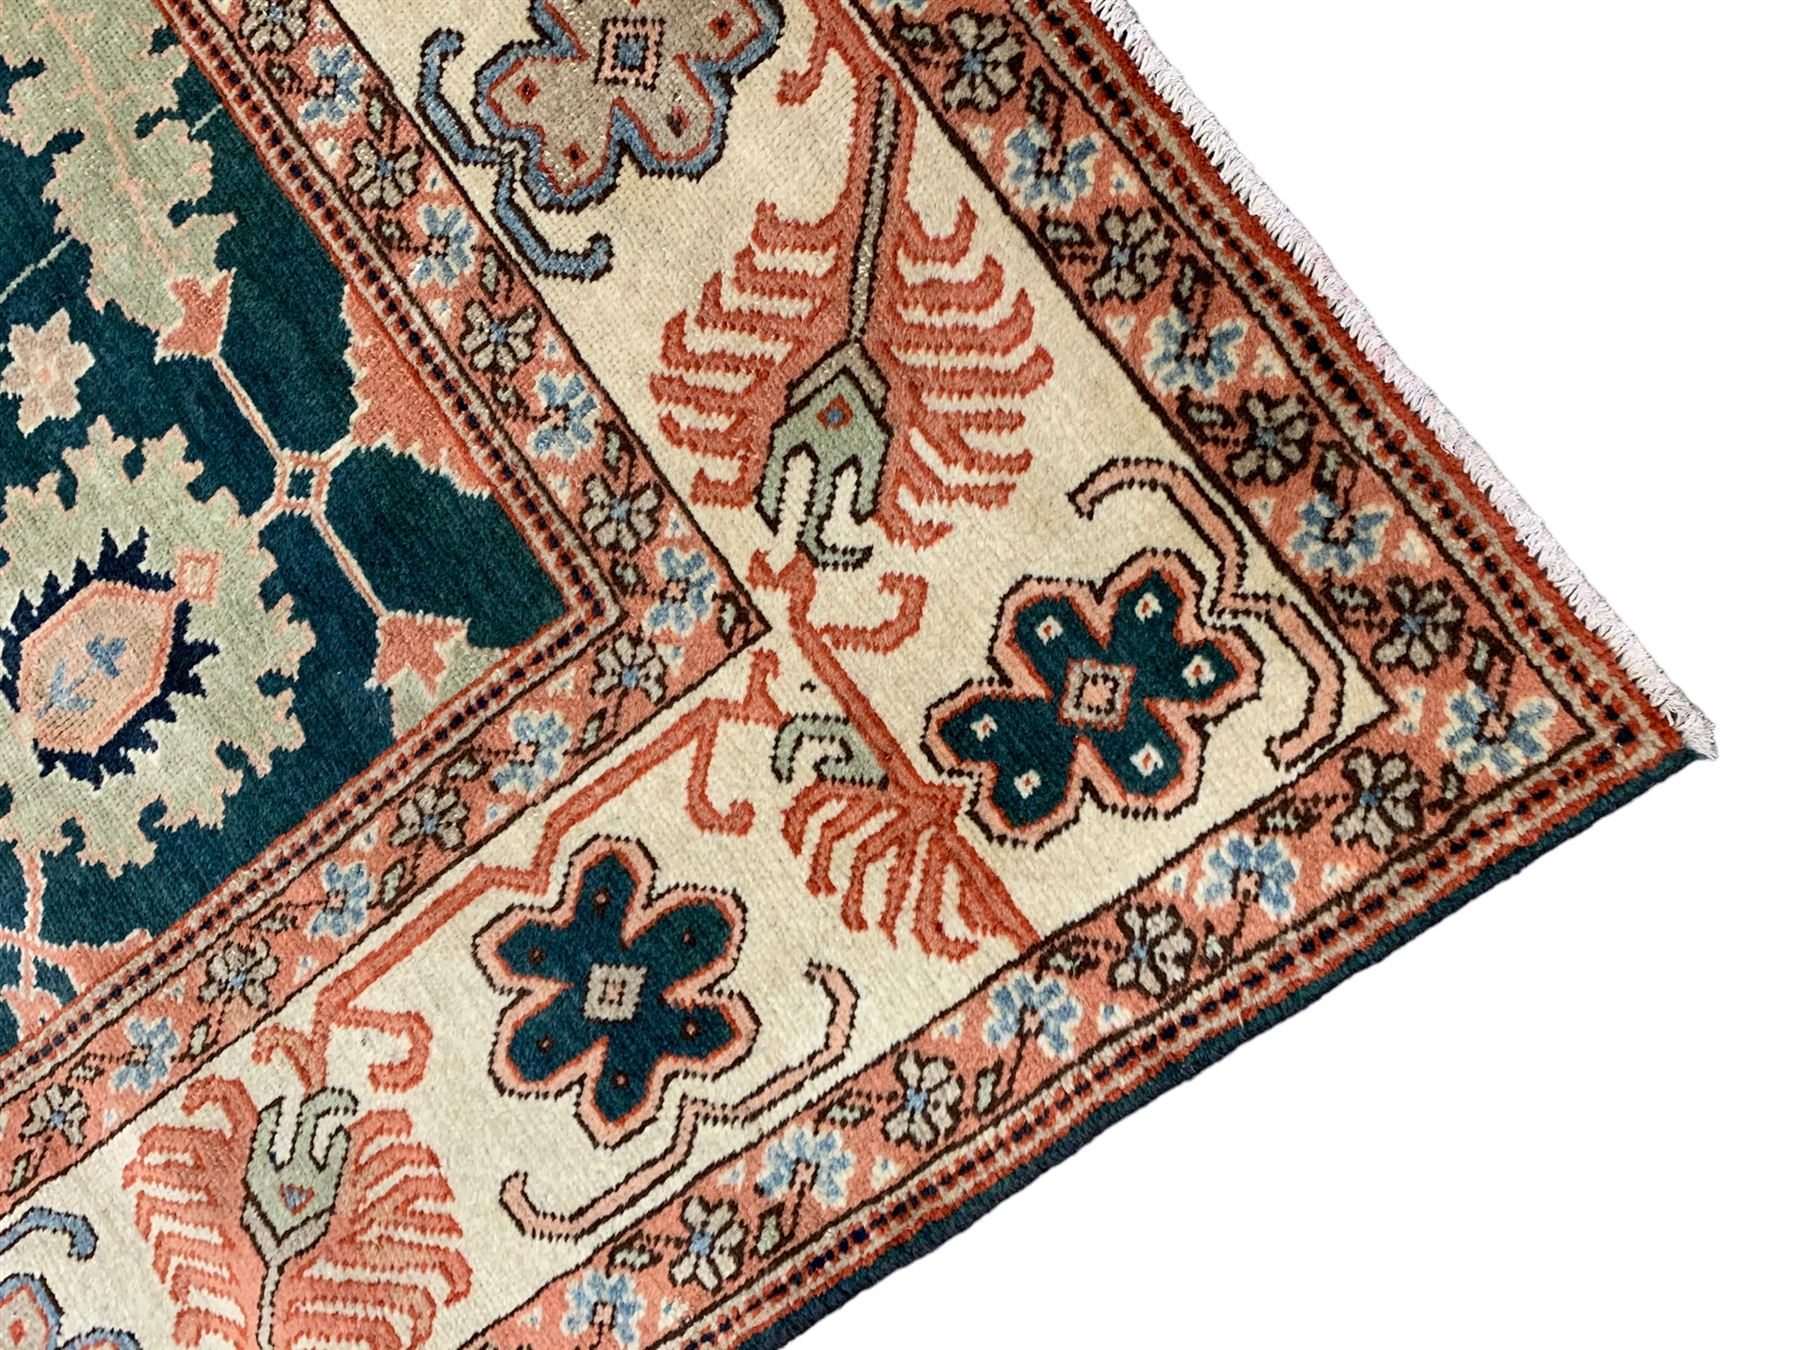 Persian emerald green ground rug - Image 3 of 10